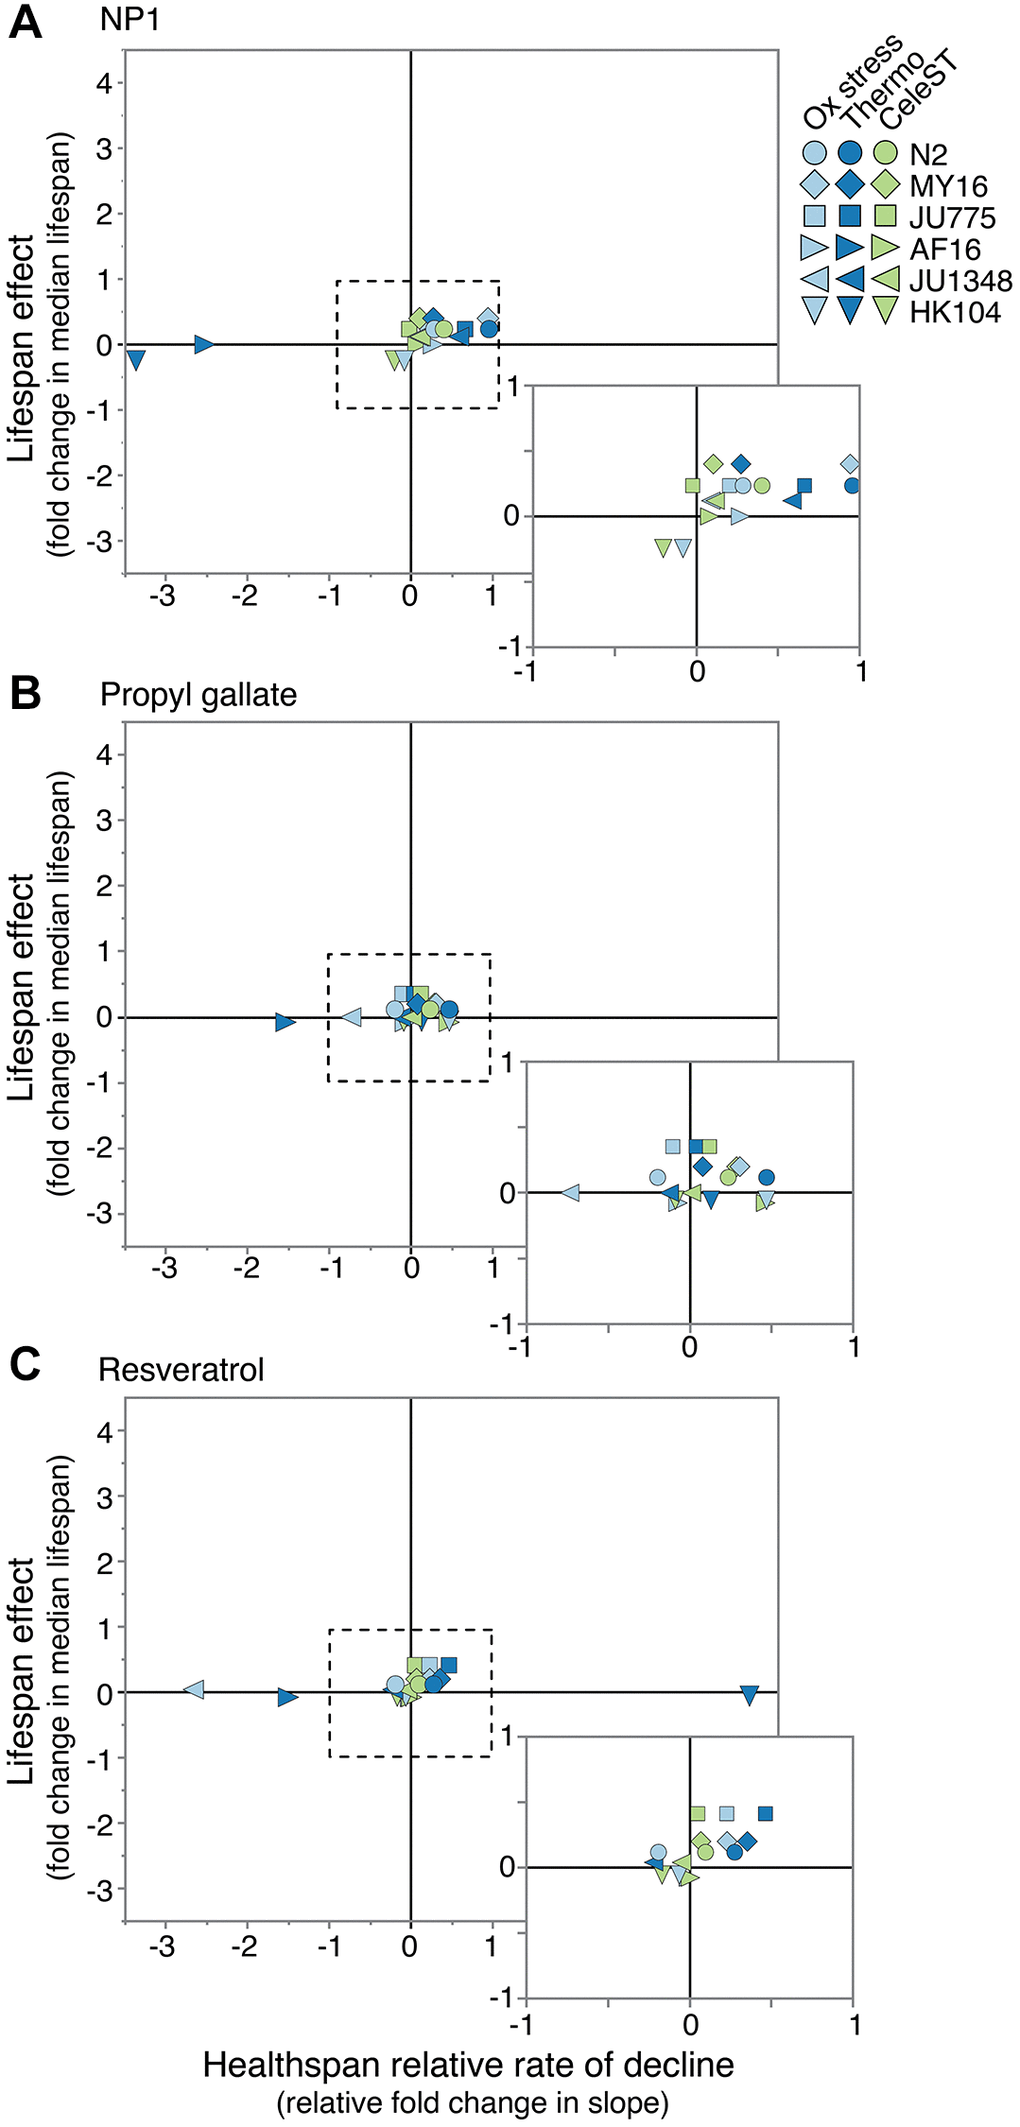 Relative compound effects on health vs. lifespan. Comparing the effect of (A) NP1, (B) propyl gallate, and (C) resveratrol on manual lifespan versus healthspan measures in two Caenorhabditis species (lifespan data from reference [34]). The lifespan effect is the fold change in median lifespan for a strain compared to its untreated control. For health, the relative rate of decline for each strain and compound is compared to the rate of decline for the control. Positive numbers would reflect either lifespan extension or slowed decline in the health measure, while negative numbers would reflect shortened lifespan and accelerated decline in the health measure. Each point represents a strain and health measure combination. Dotted line surrounds expanded box.